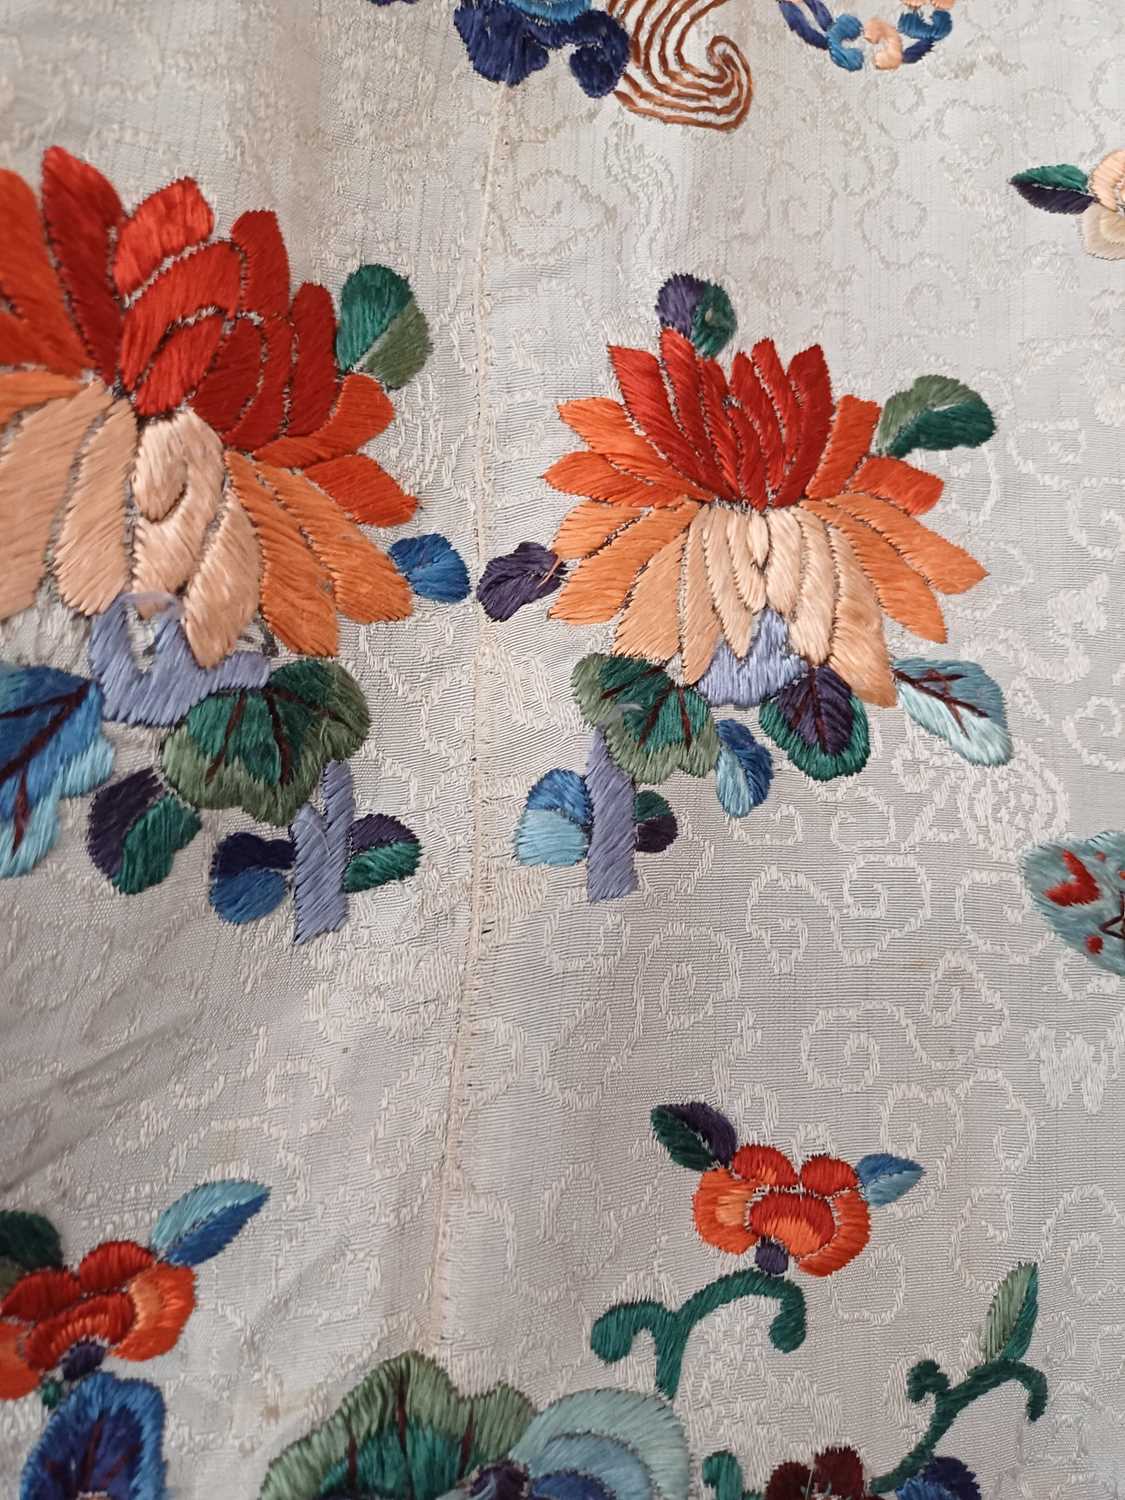 Early 20th Century Chinese Dark Cream Figured Silk Robe embroidered with decorative birds and floral - Image 30 of 31